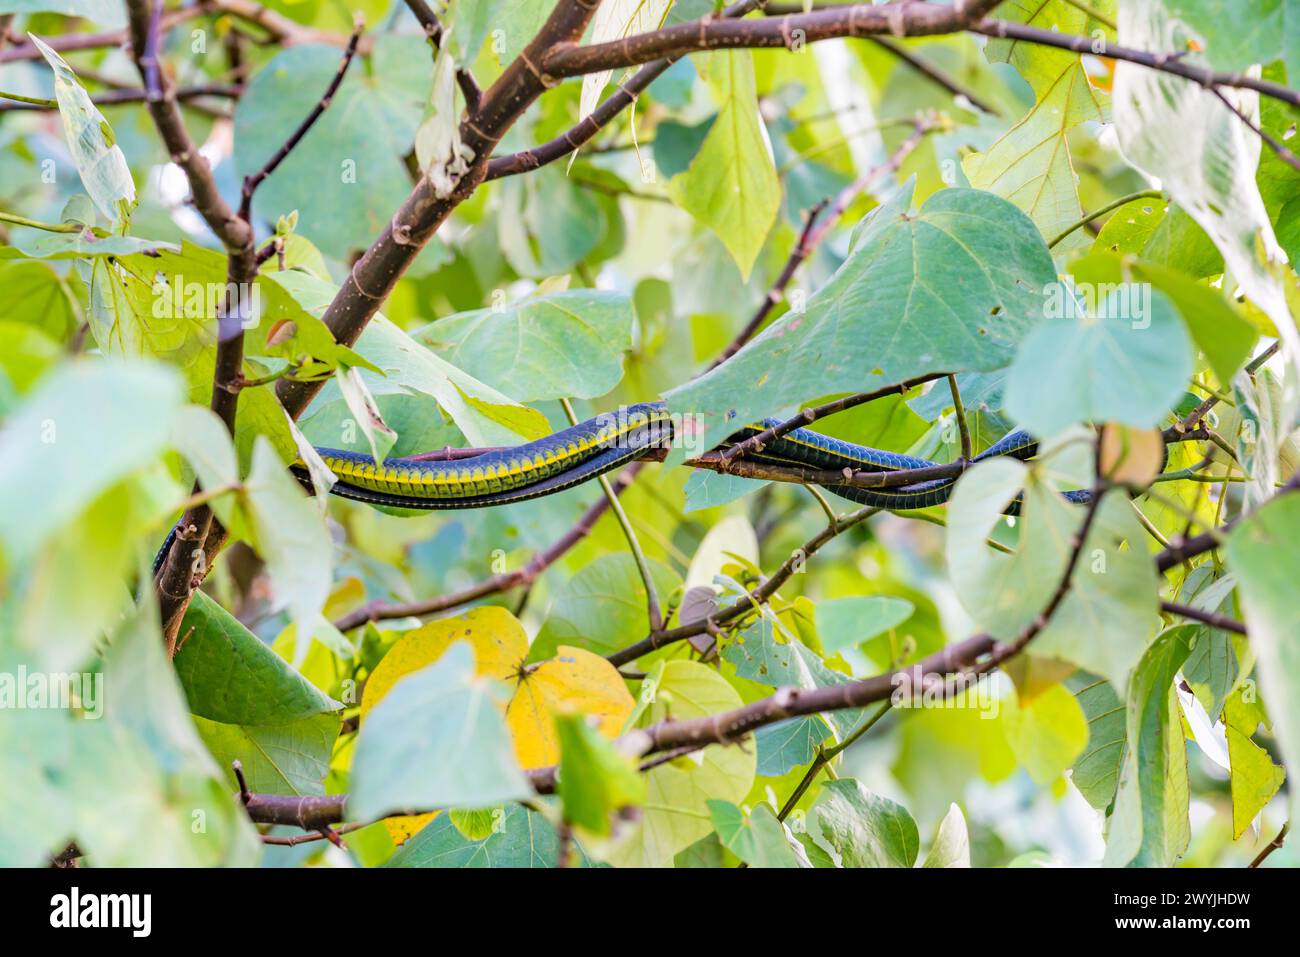 A common or green tree snake (Dendrelaphis punctulata) in a trre in Queensland, Australia looks almost like a tree branch itself Stock Photo